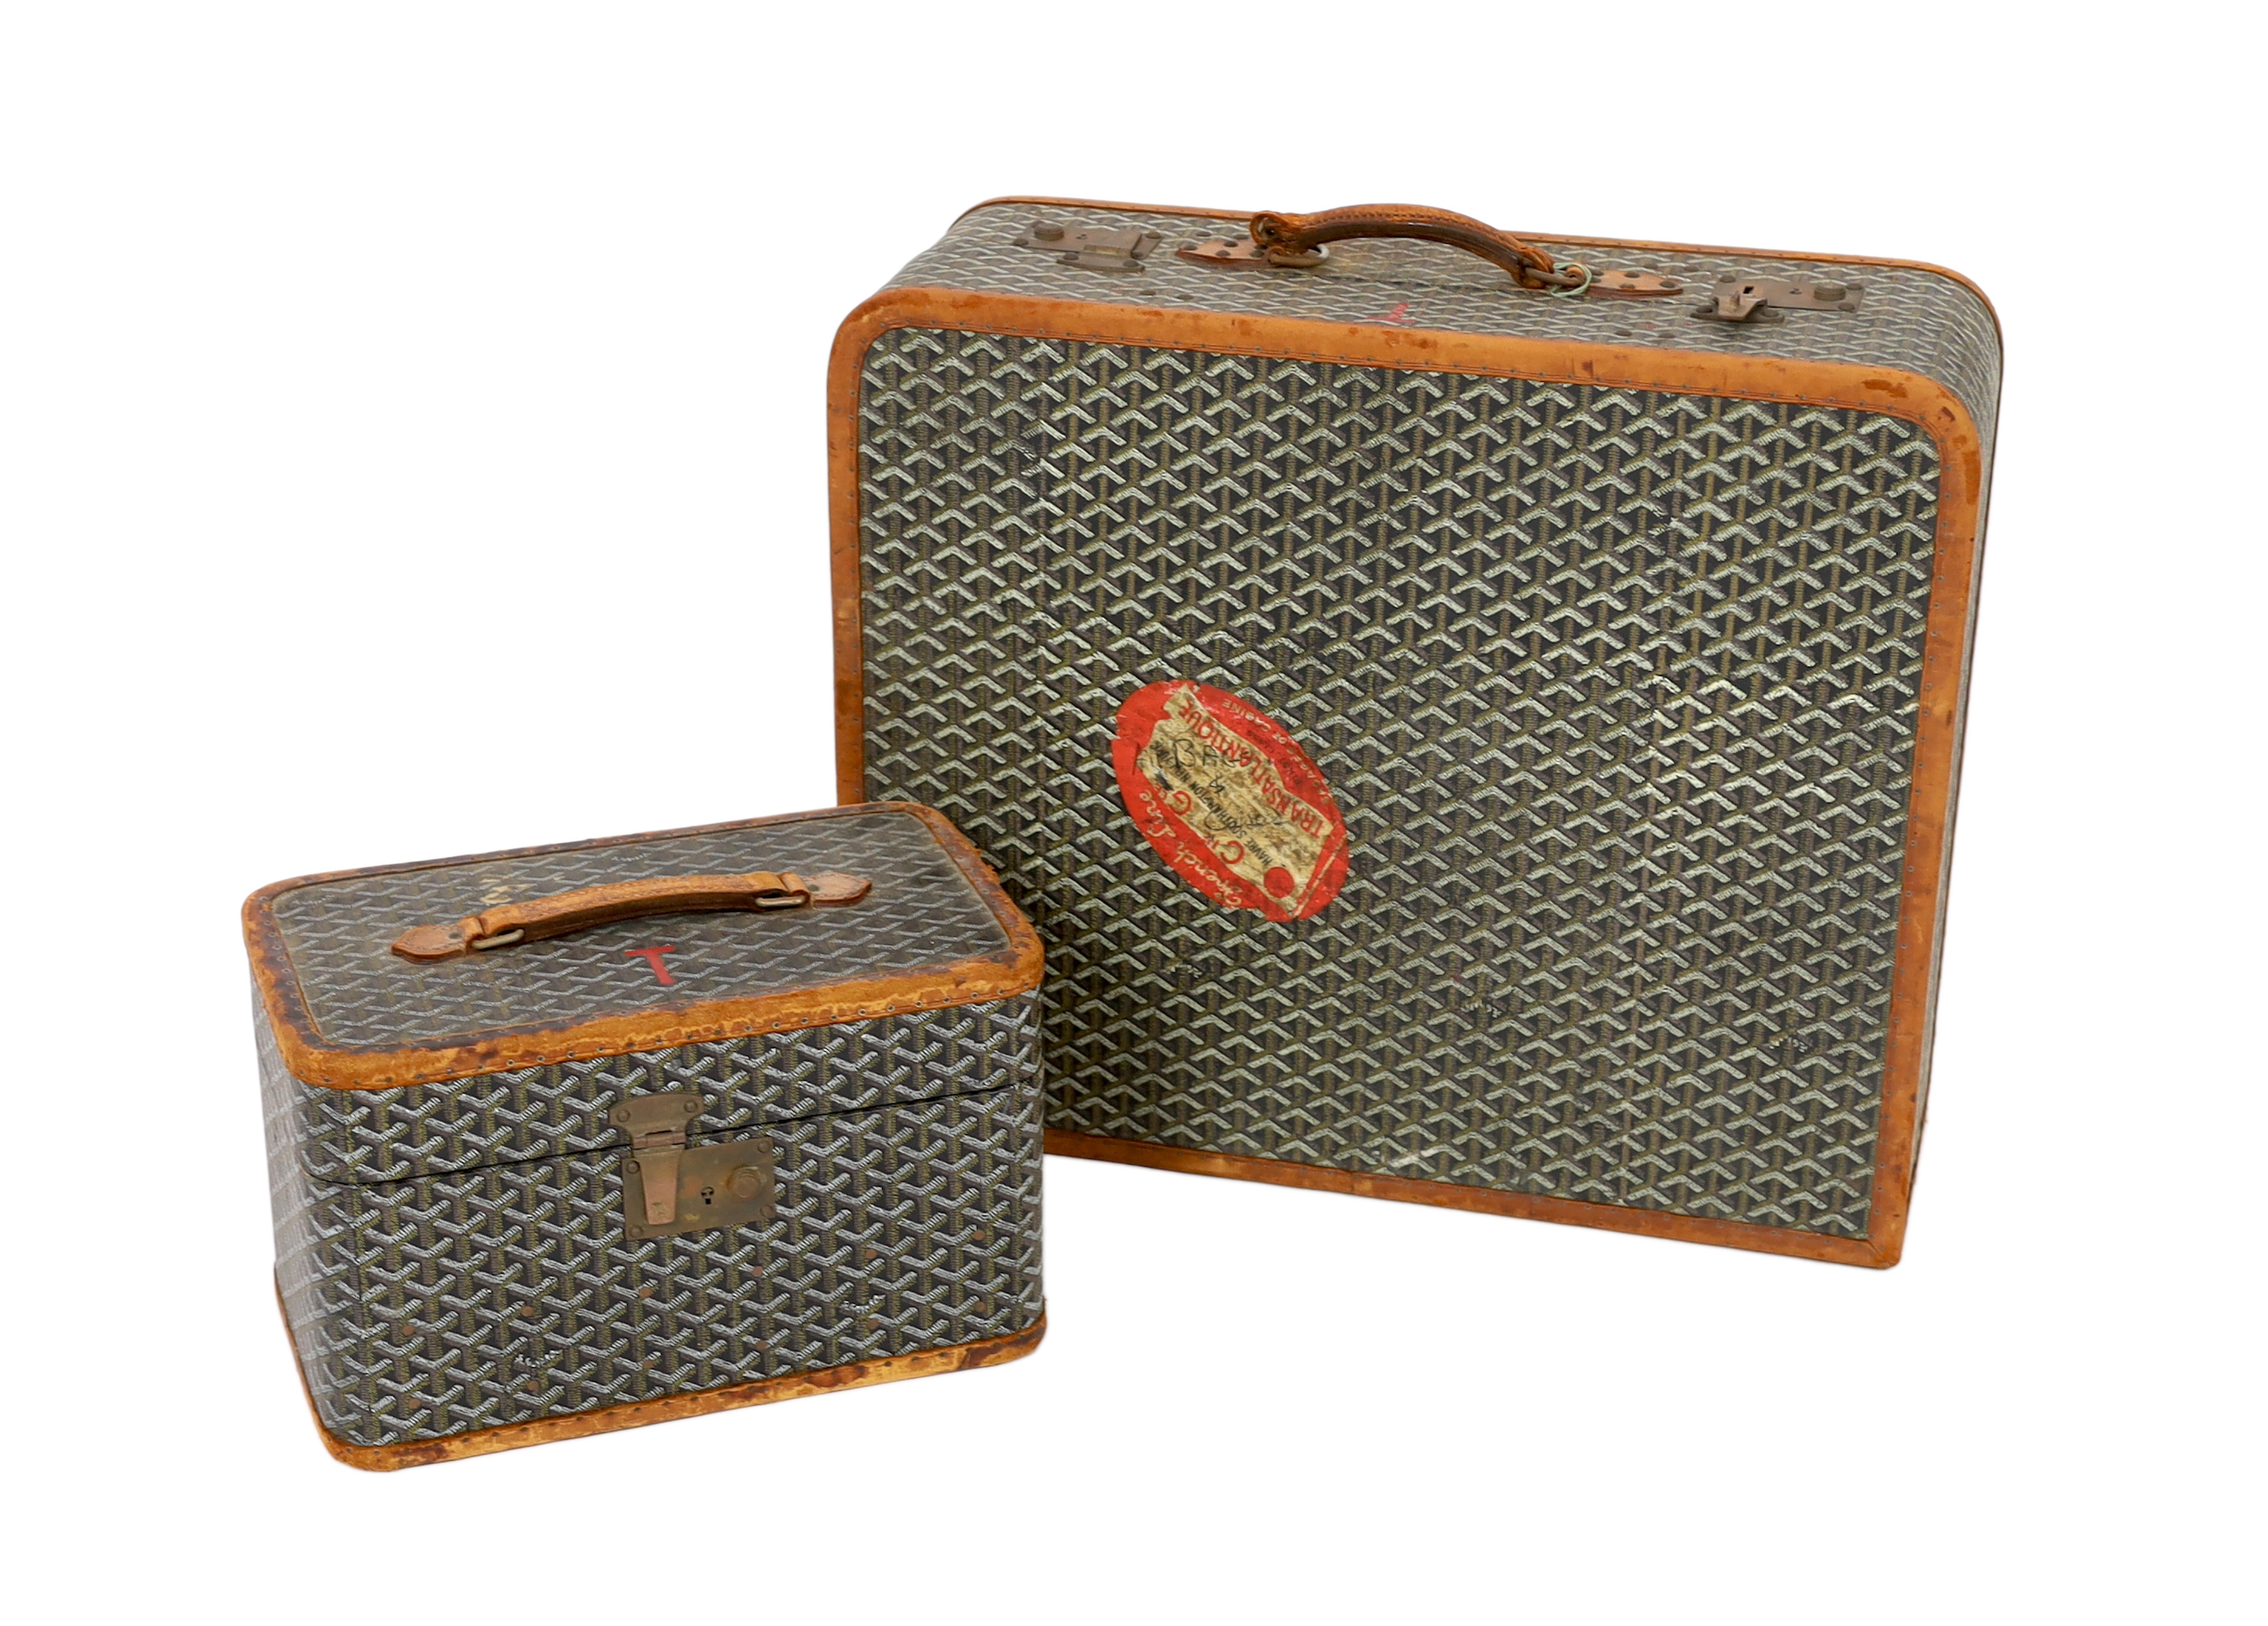 A 1940's Goyard vanity case with matching suitcase, vanity case width 37cm, depth 23cm, height 23cm; suitcase width 59cm, depth 21cm, height 50cm high